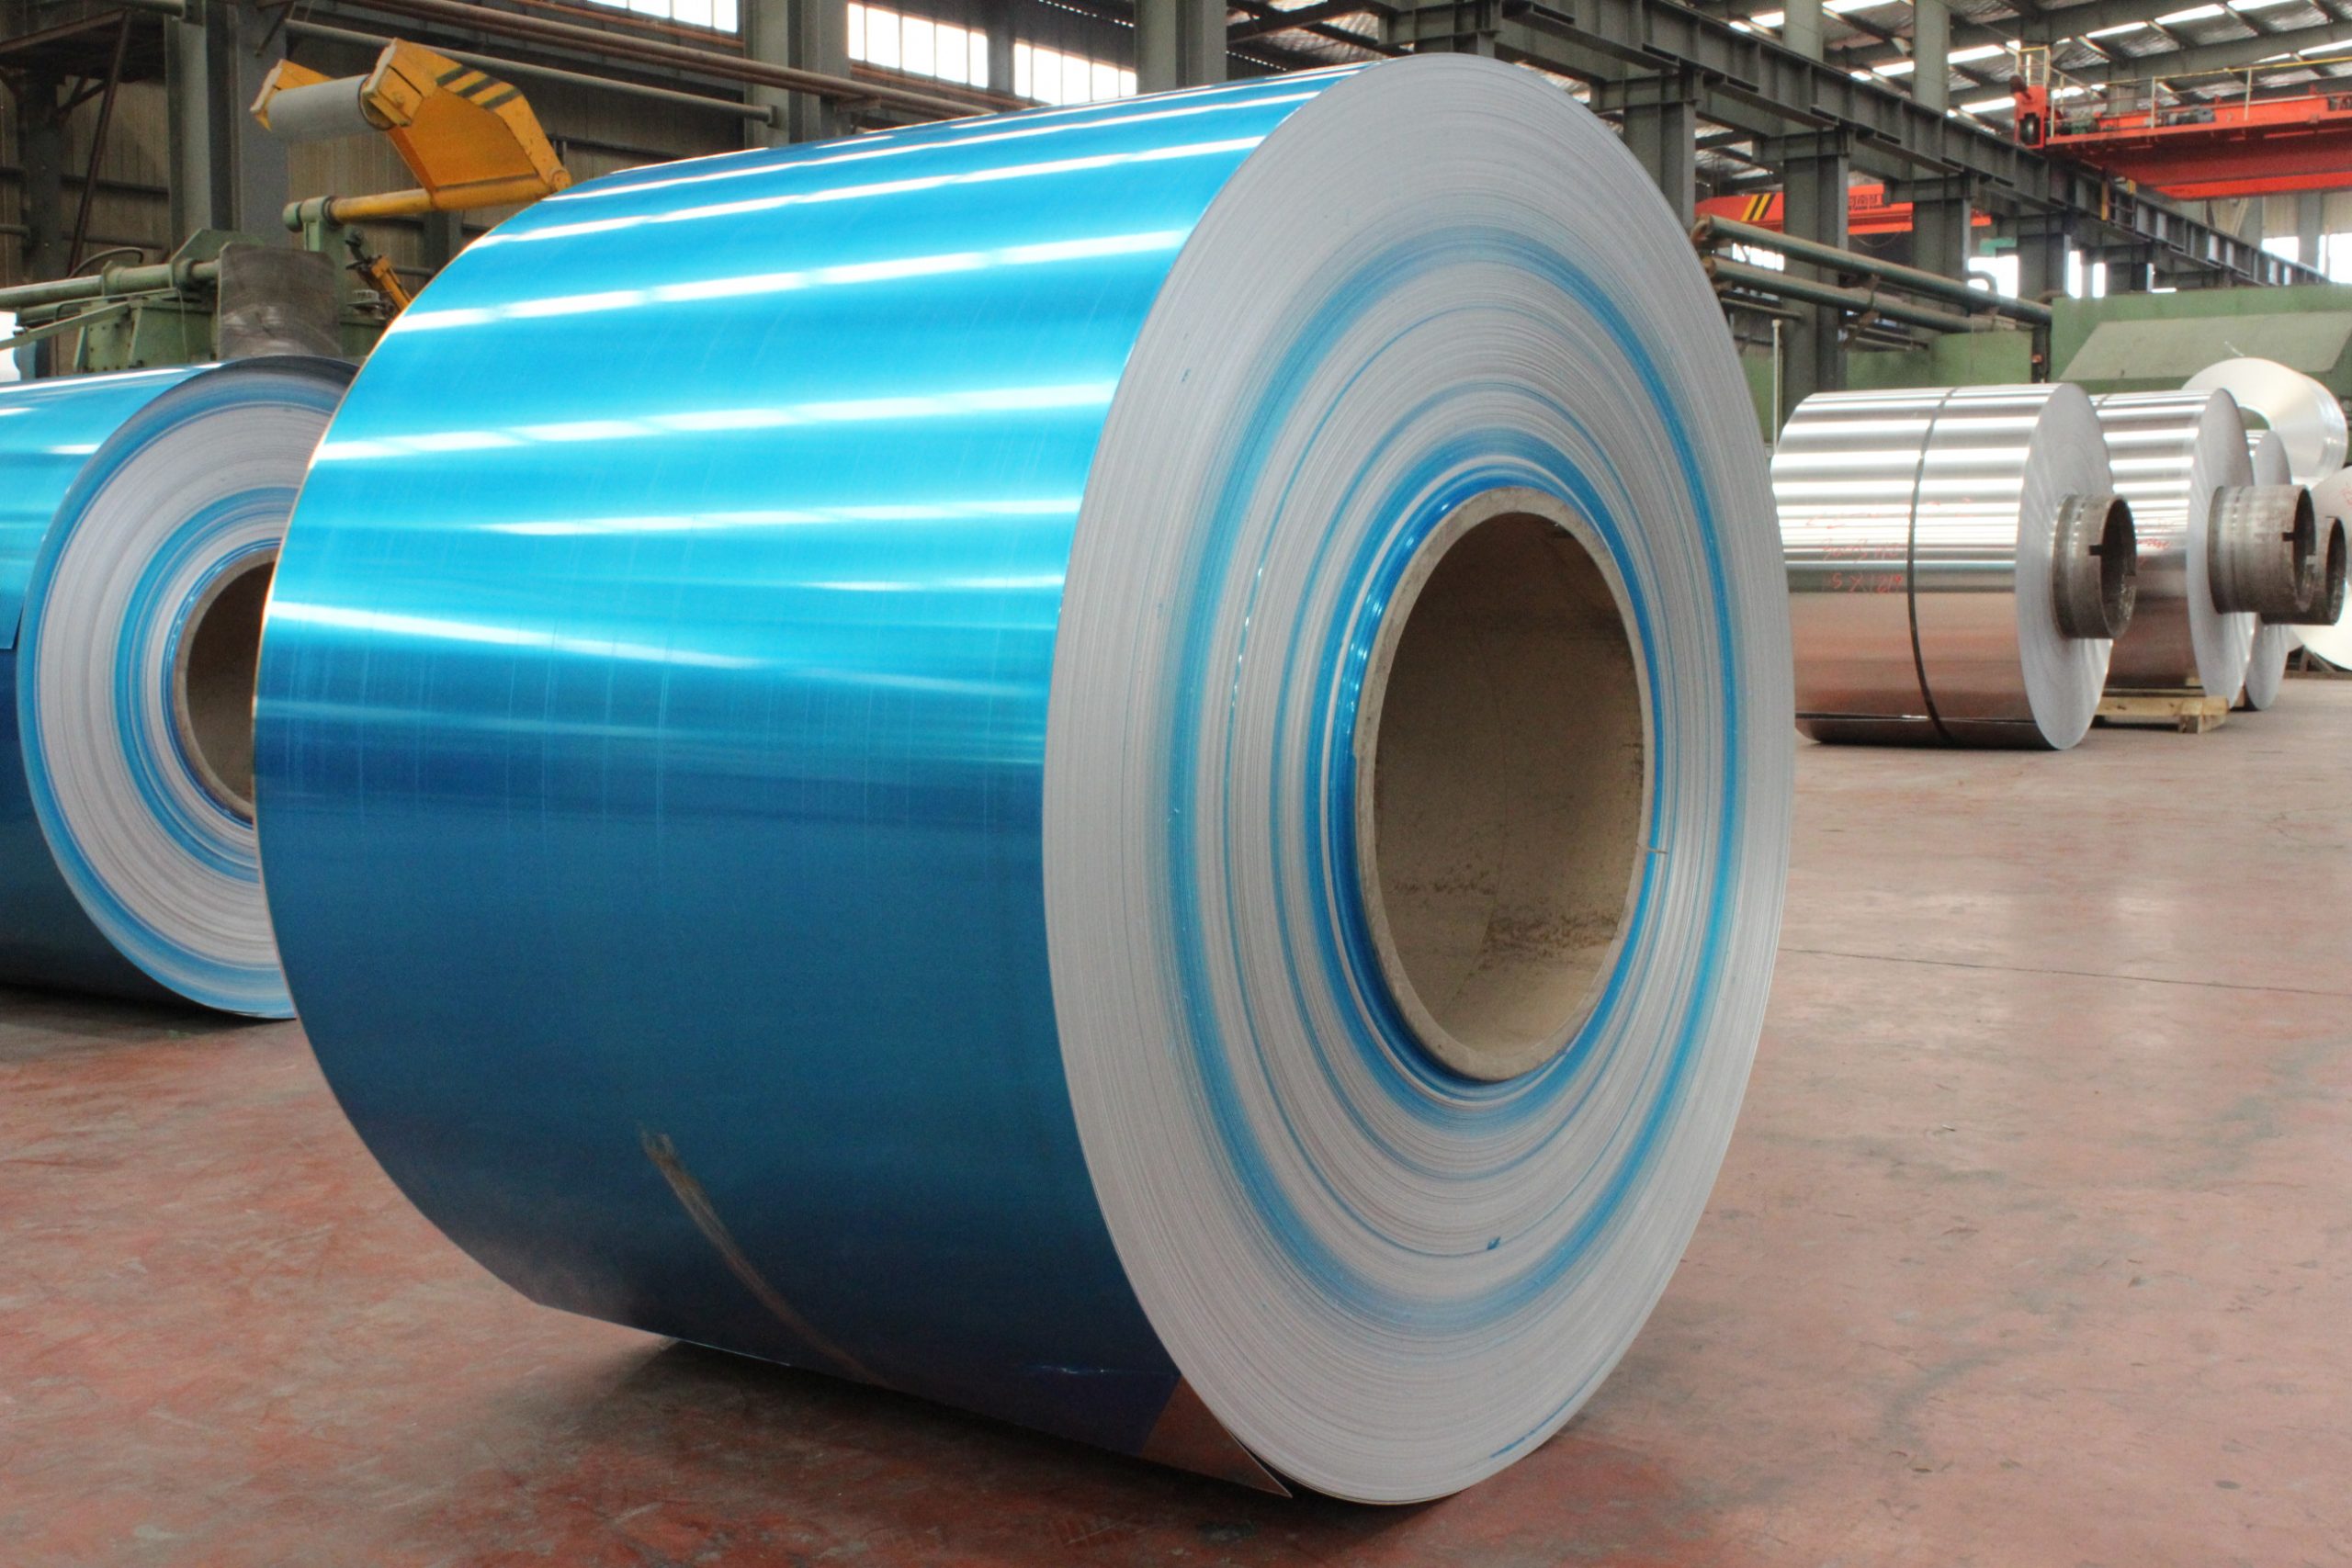 Opaque Packaging Material, Thin Mirror Sheet Widely Used